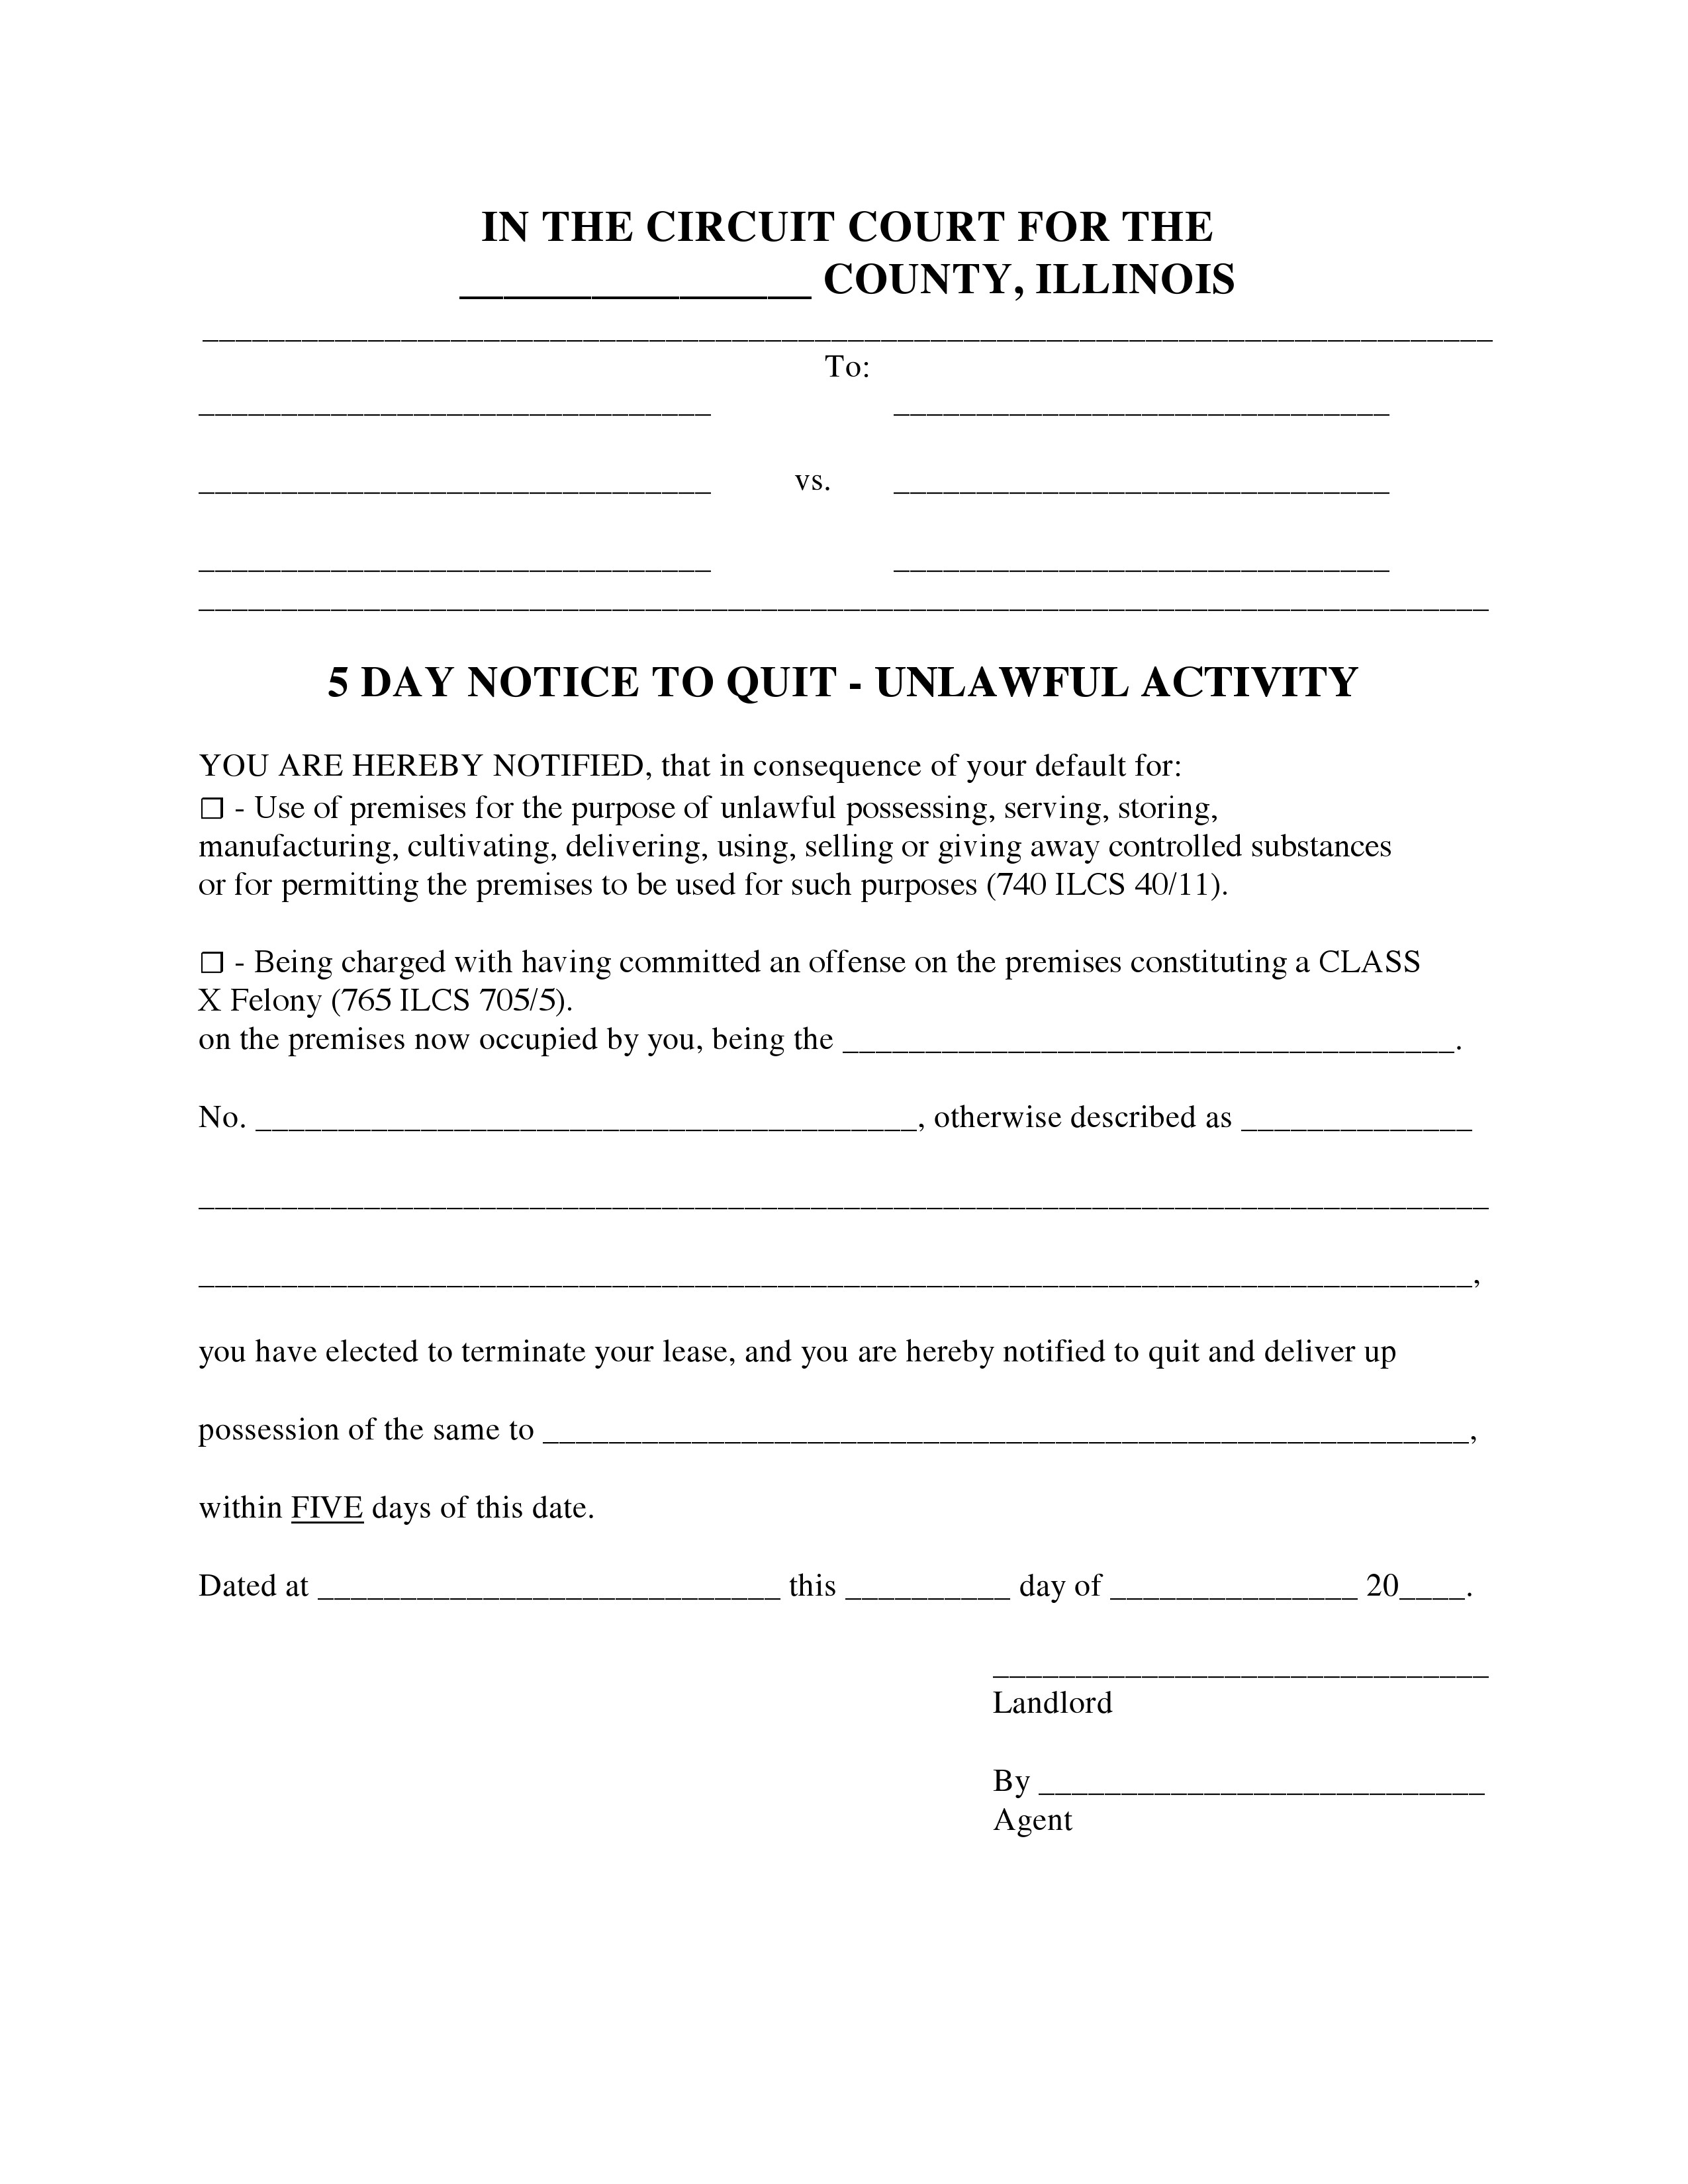 free illinois 5 day notice to quit form unlawful 30 day eviction